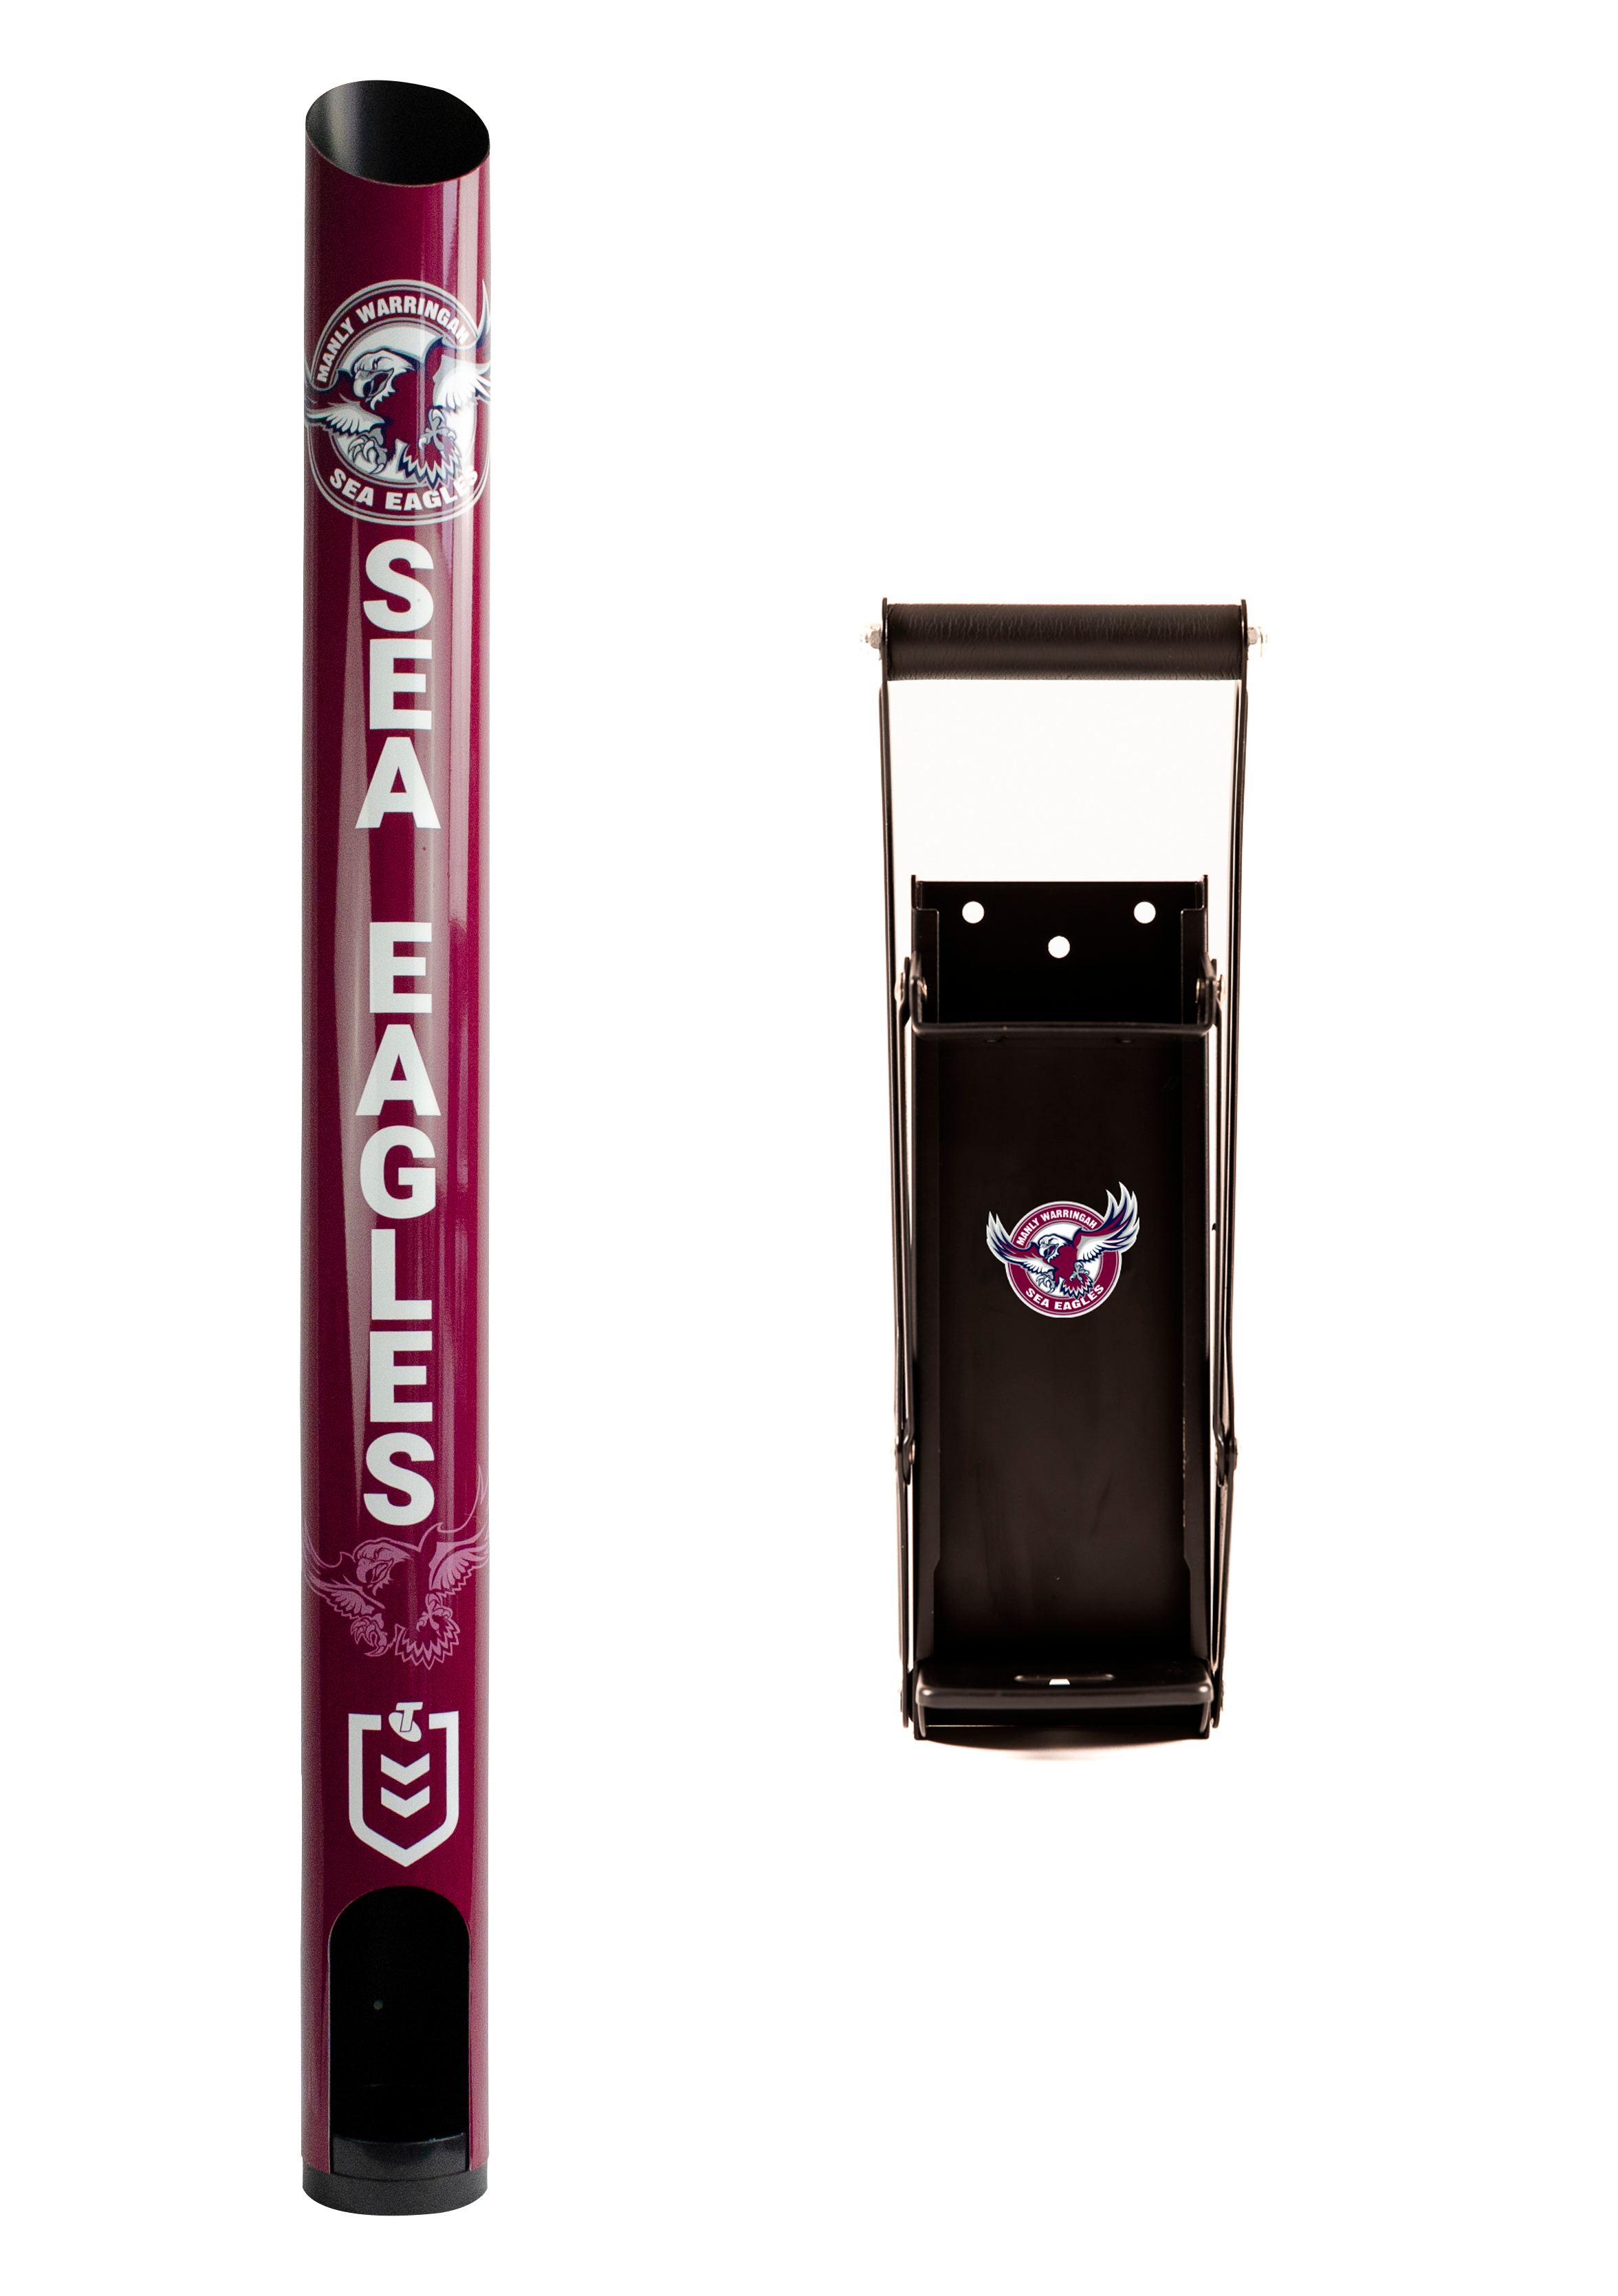 Manly Sea Eagles NRL Dispenser + Can Crusher Combo